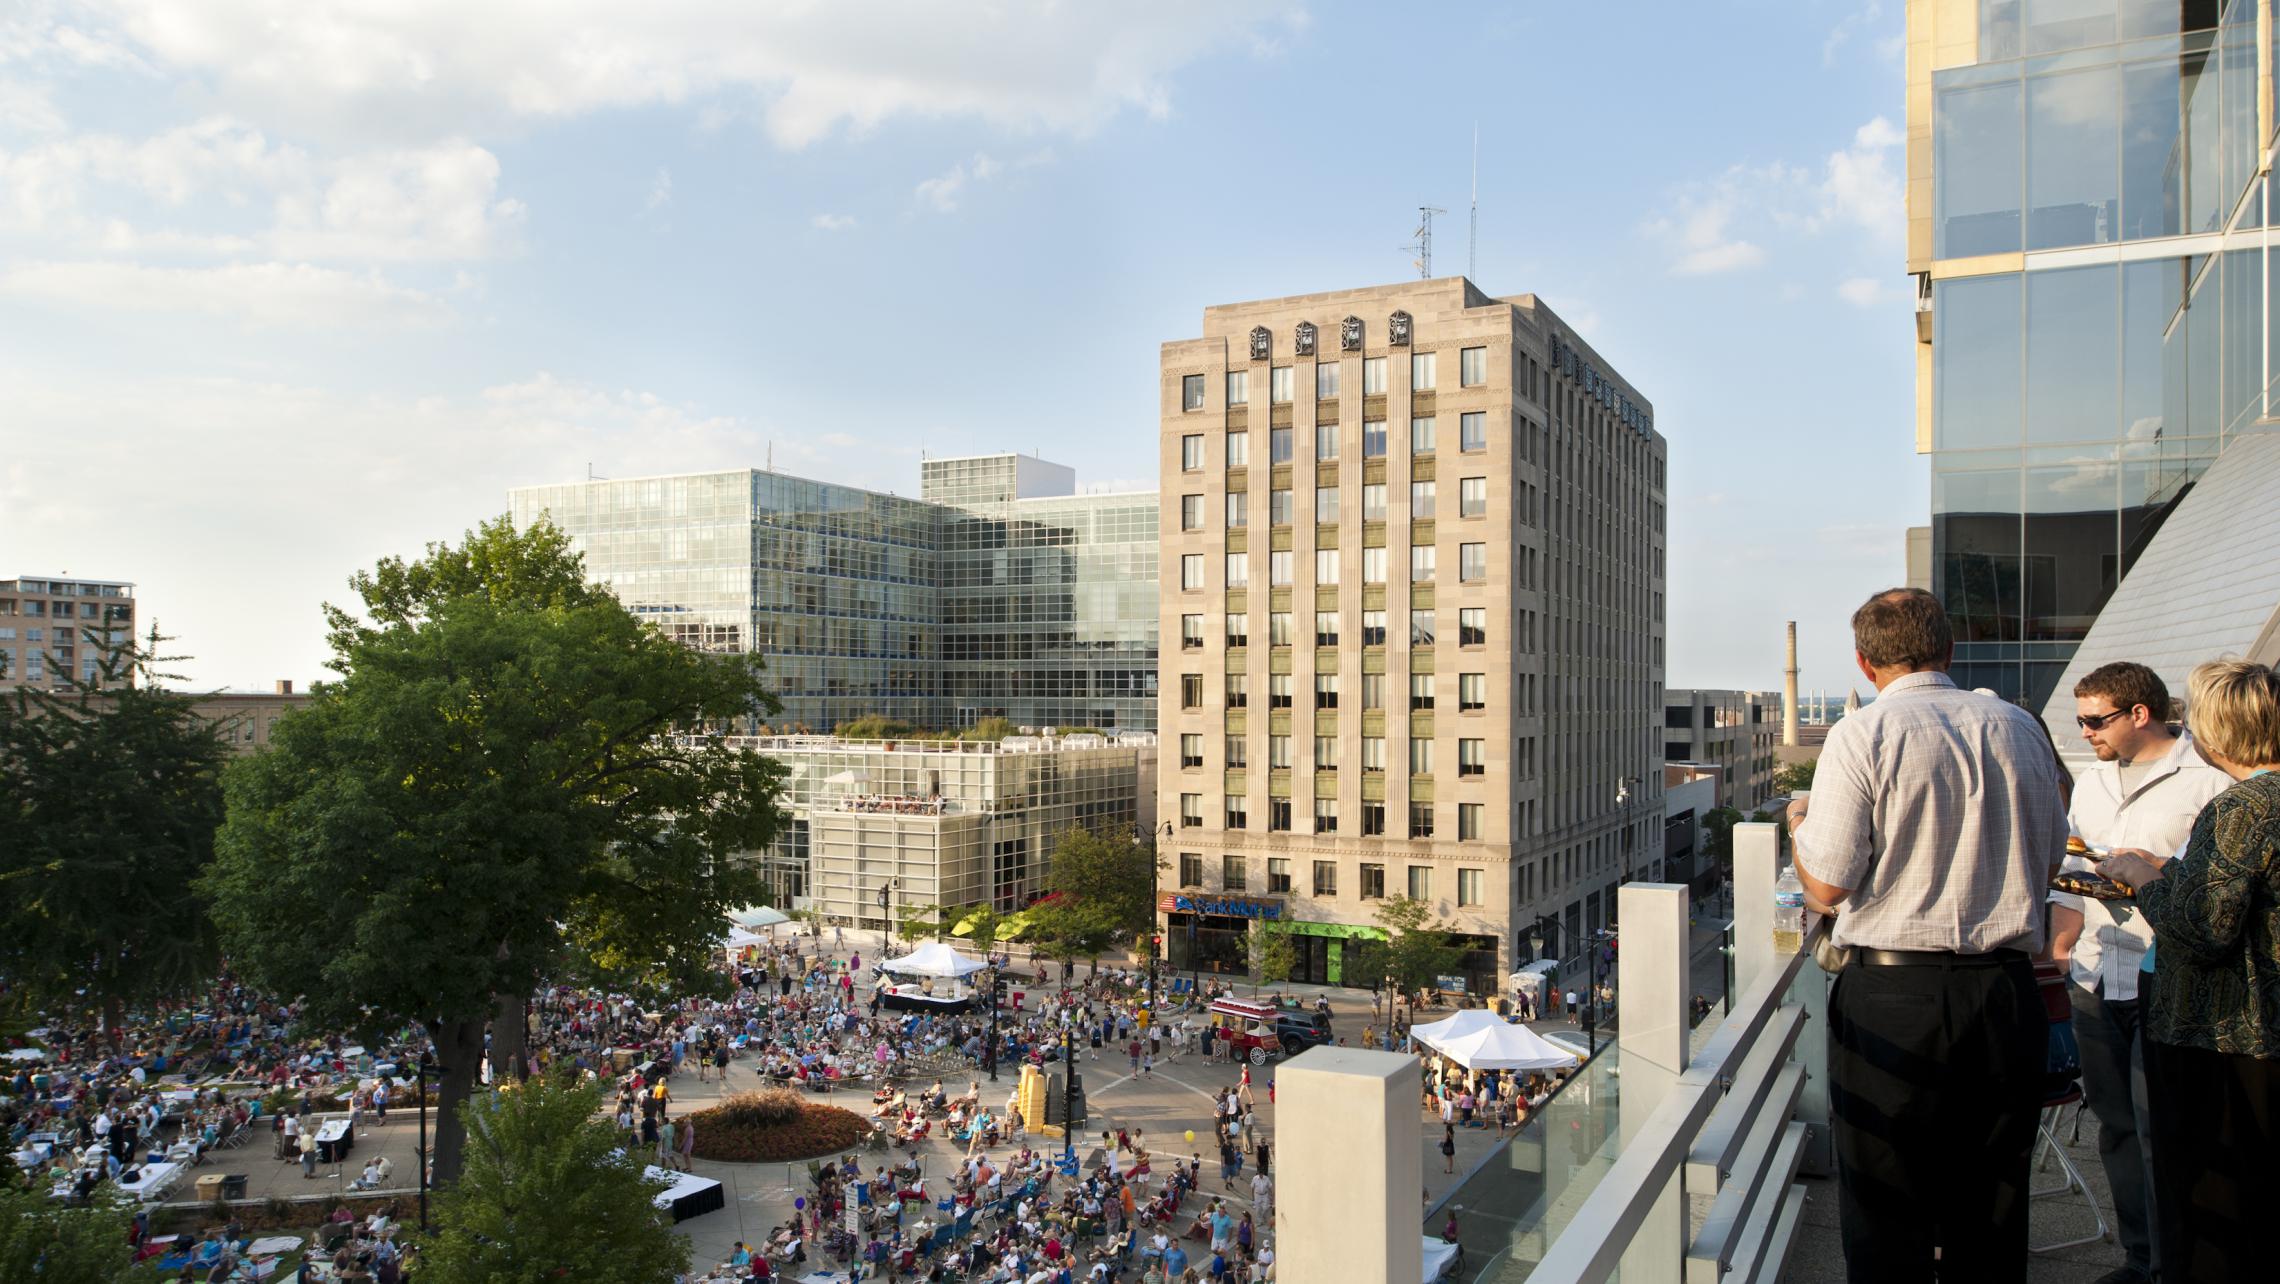 ULI US Bank Plaza and Tenney Plaza, Concerts on the Square Event